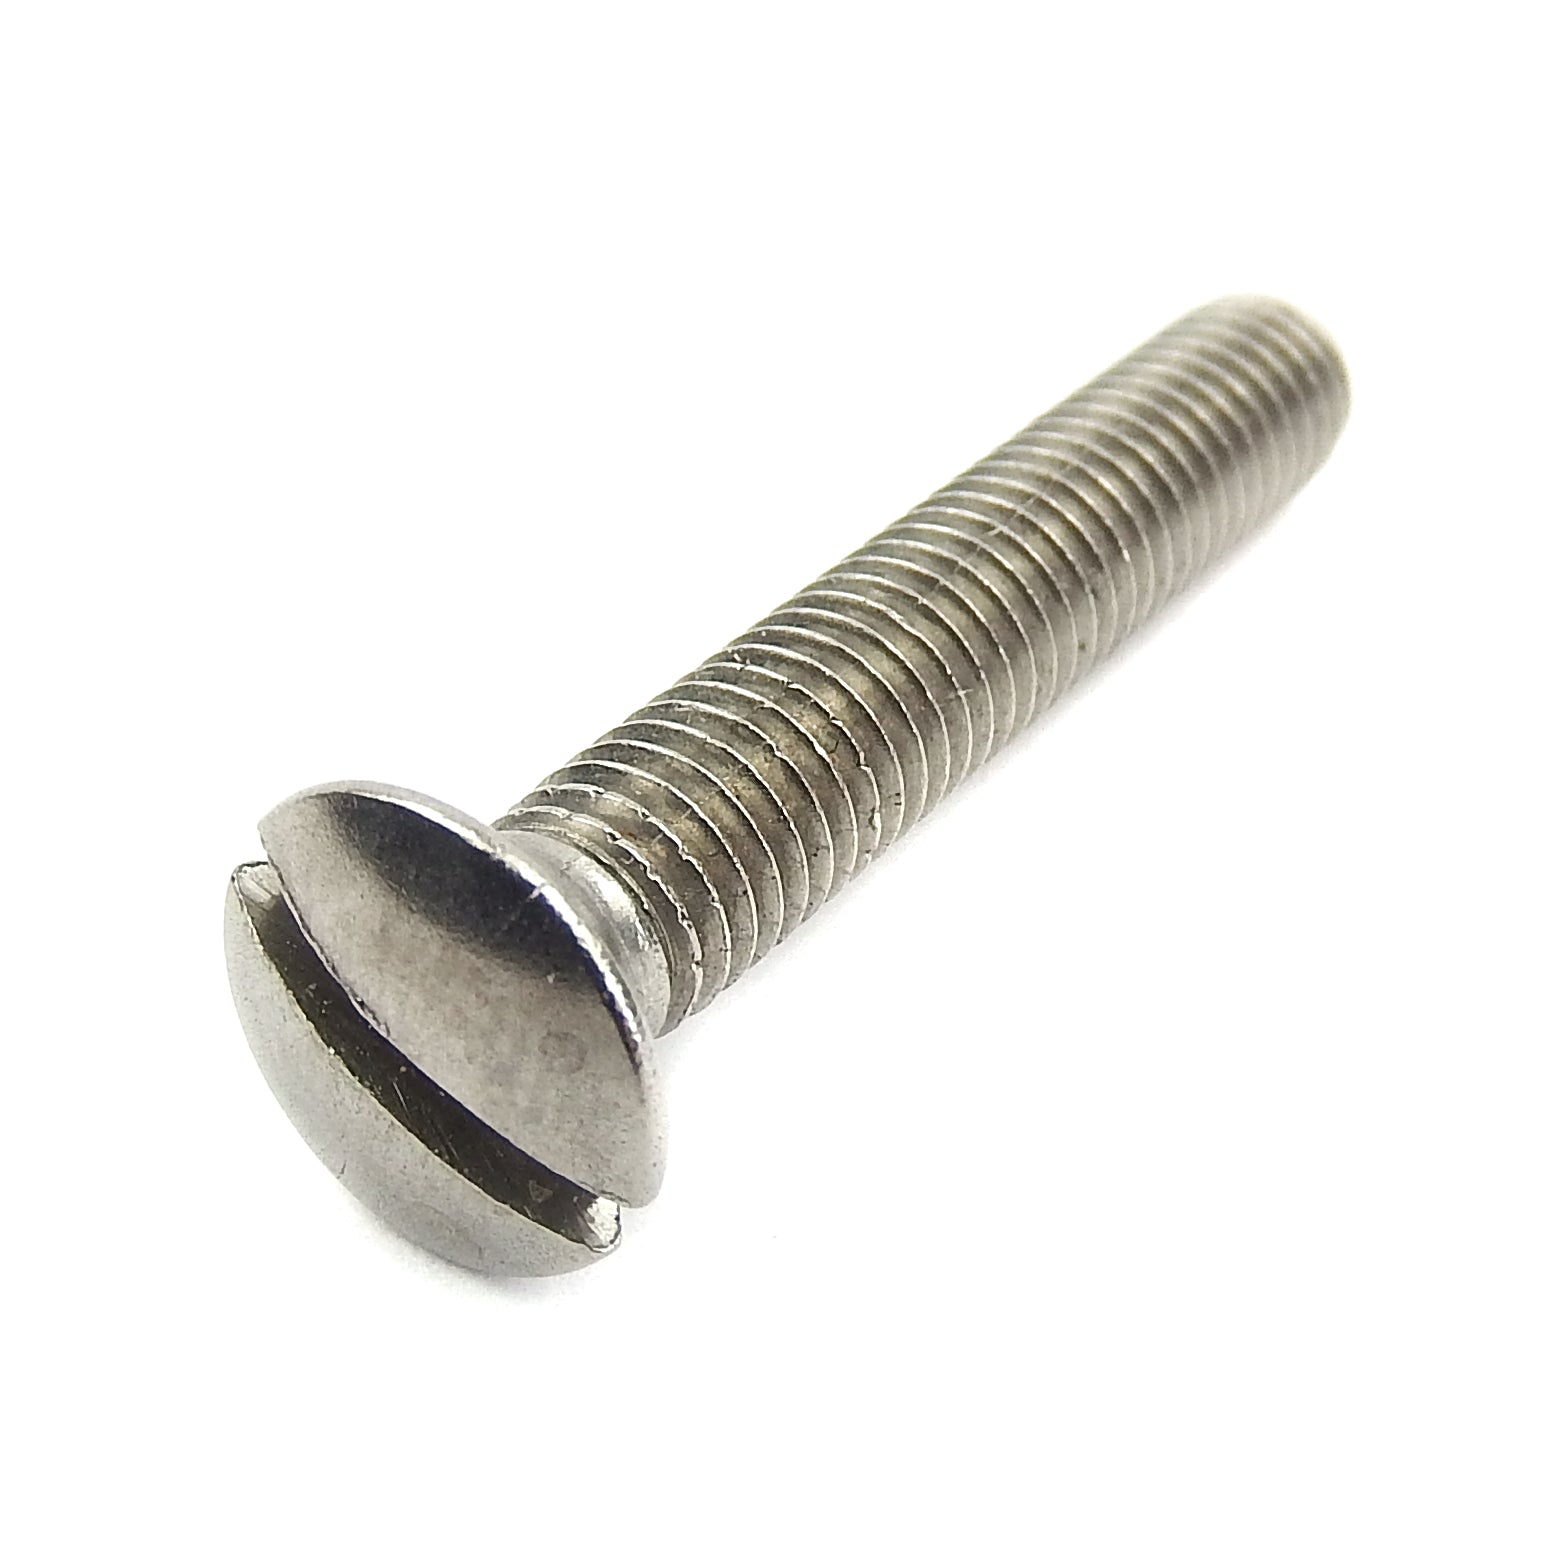 Counter Sunk Raised Screw M4 x 25mm Stainless